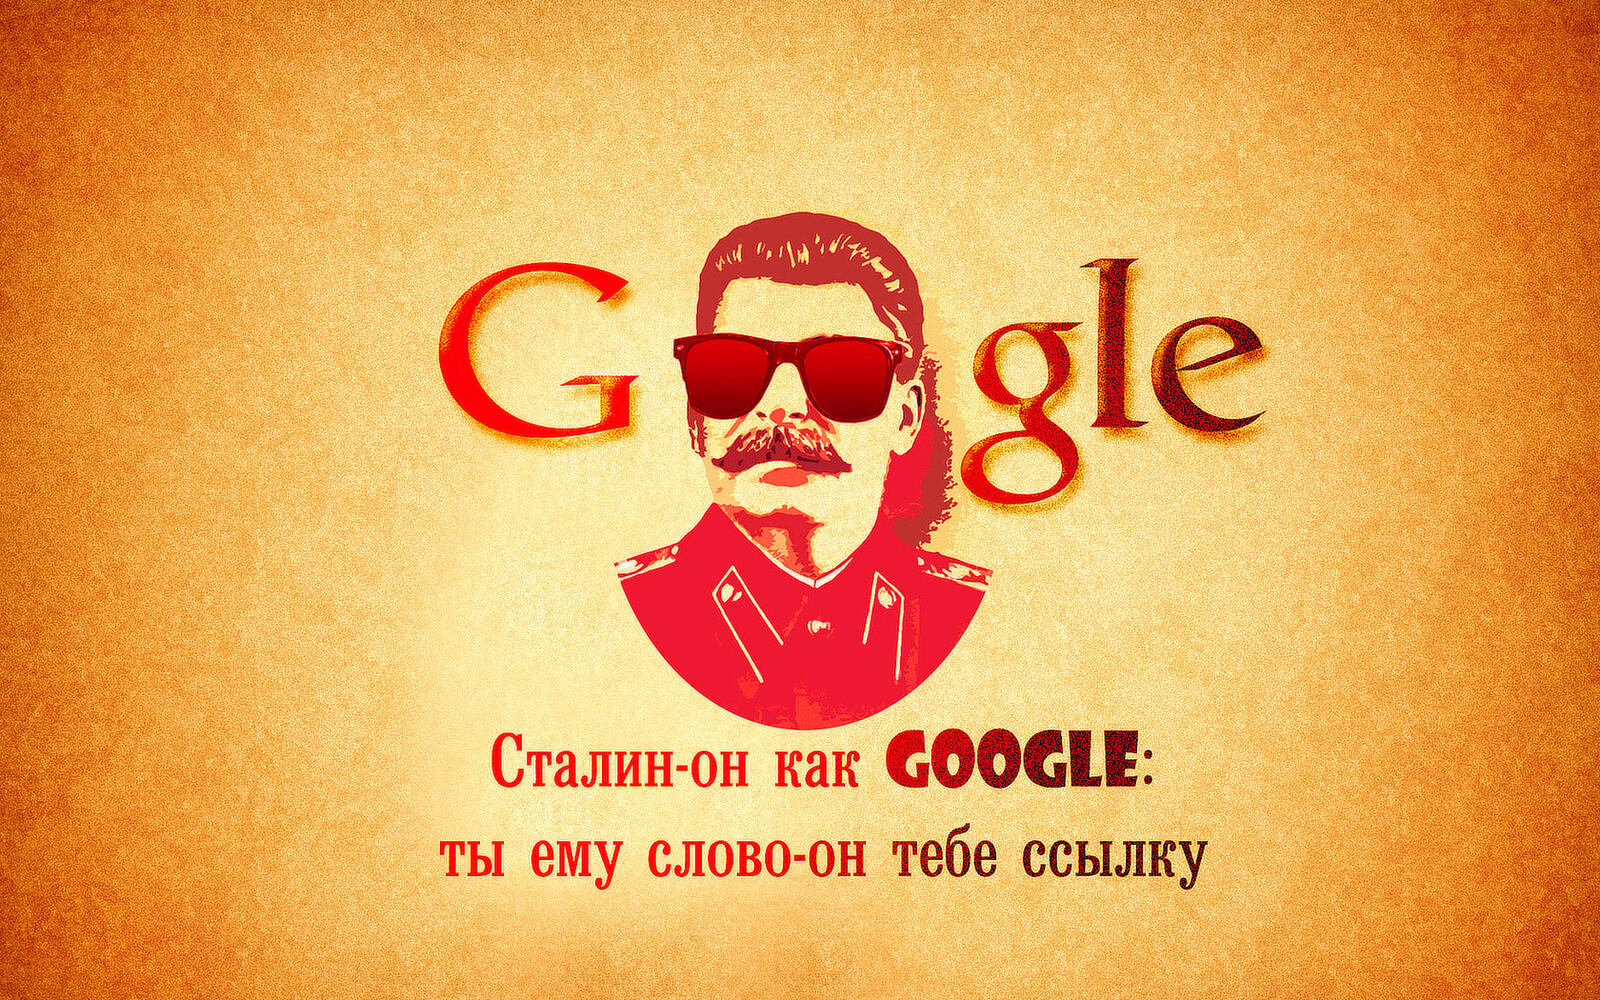 Wallpapers stalin he is like Google you tell him on the desktop